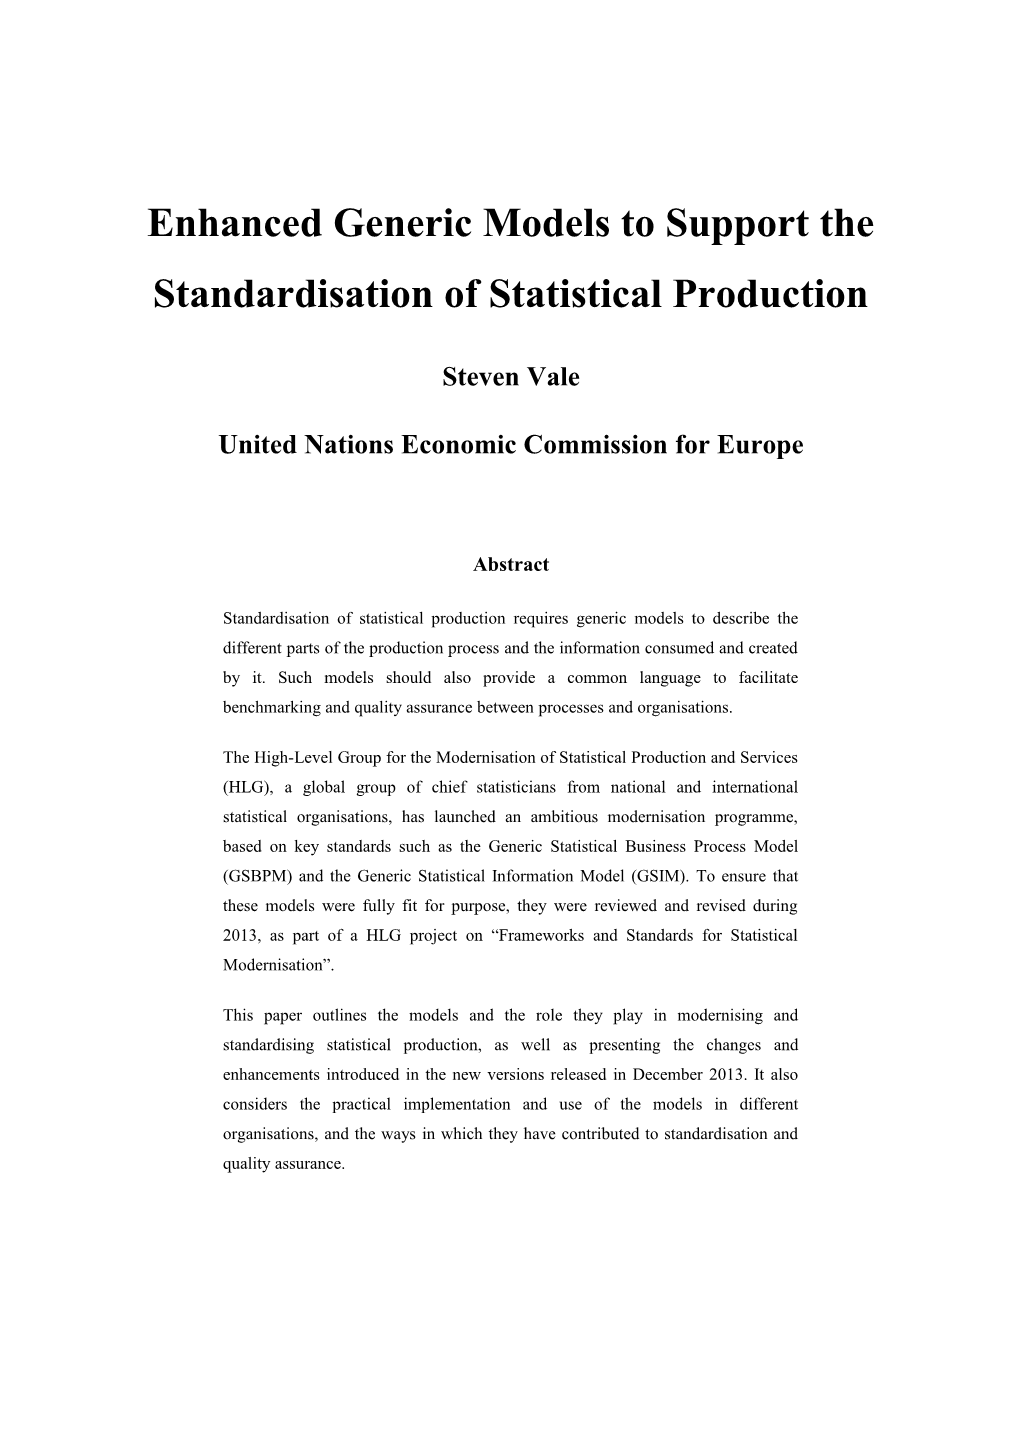 Enhanced Generic Models to Support the Standardisation of Statistical Production